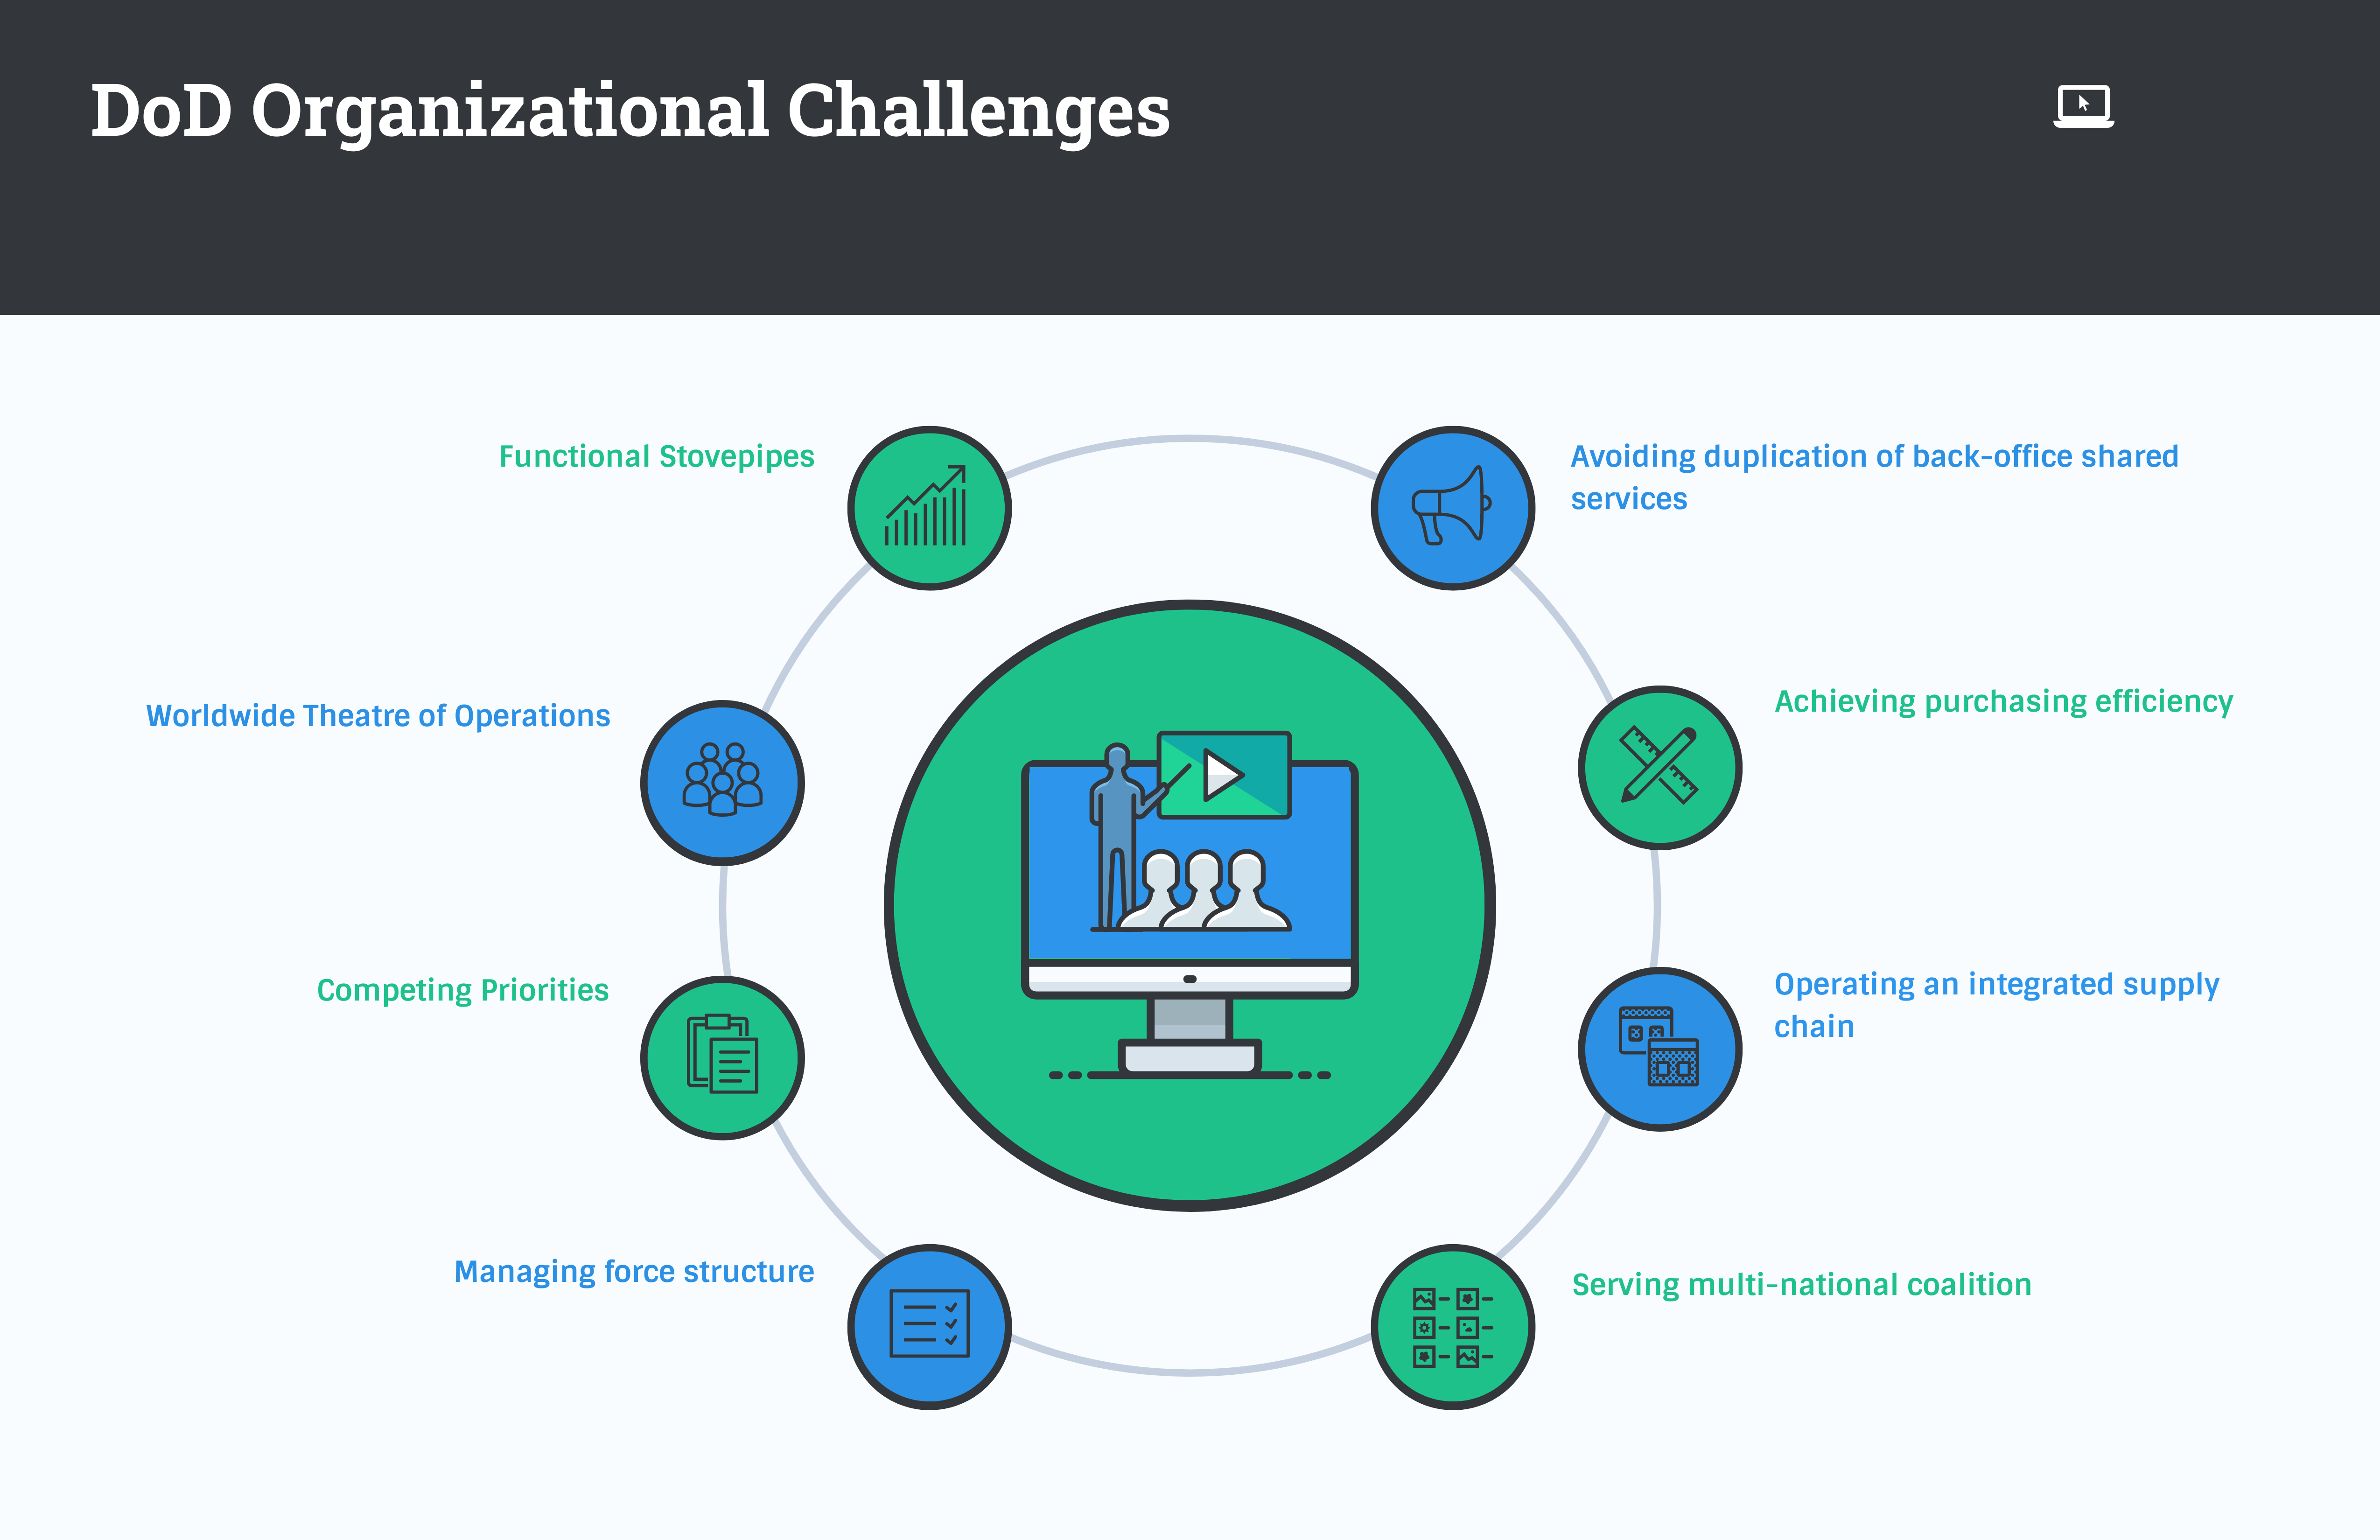 What are the DoD Organizational Challenges